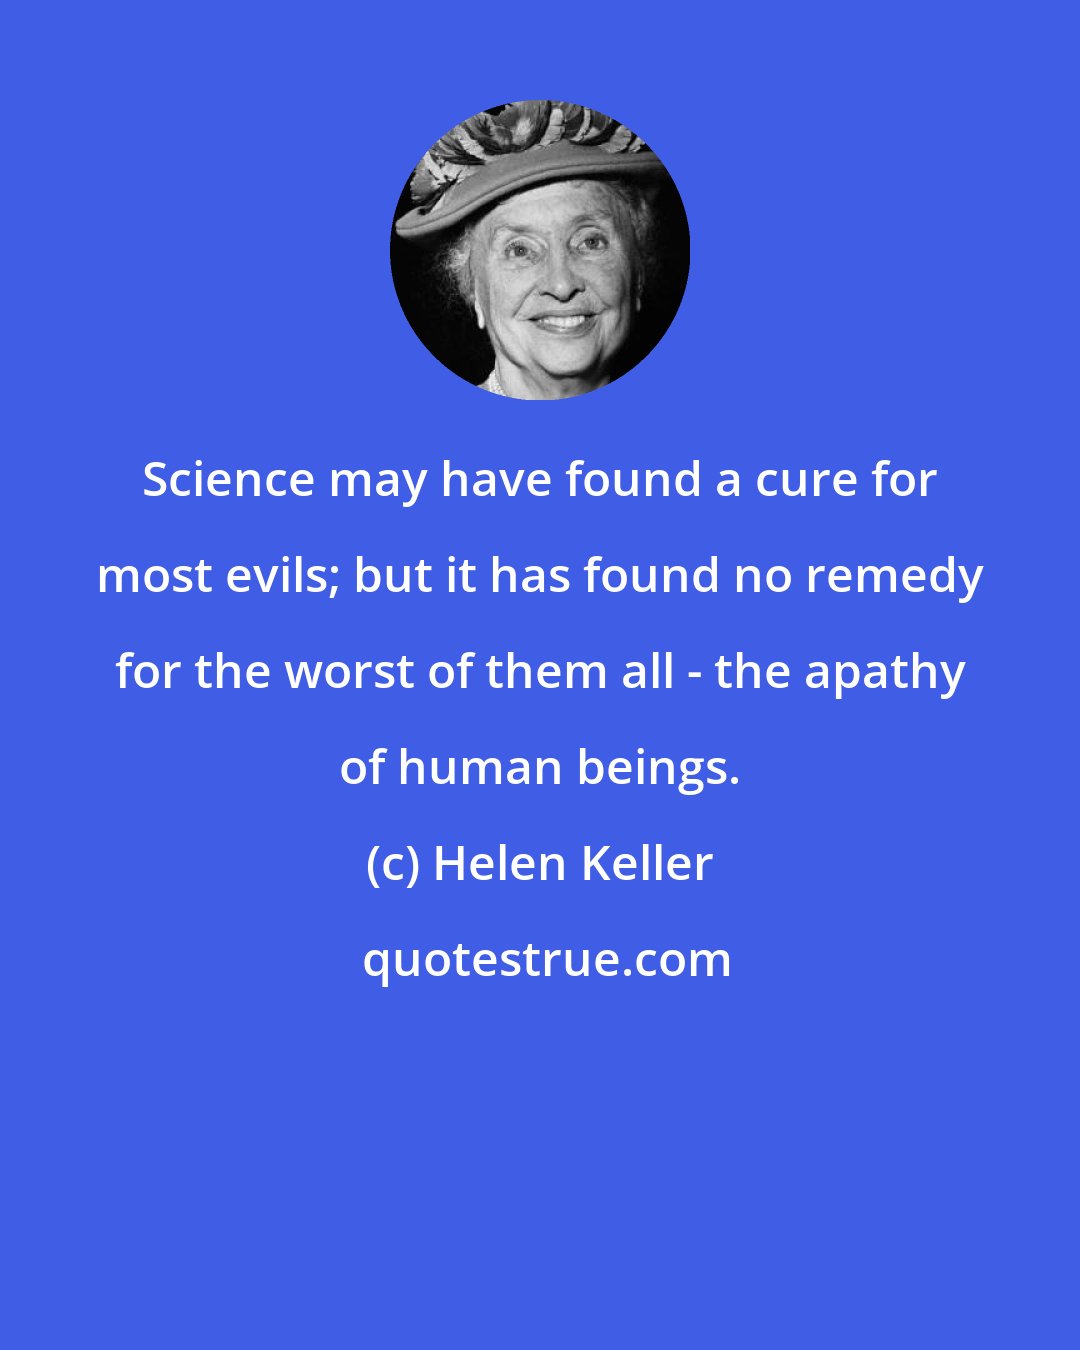 Helen Keller: Science may have found a cure for most evils; but it has found no remedy for the worst of them all - the apathy of human beings.